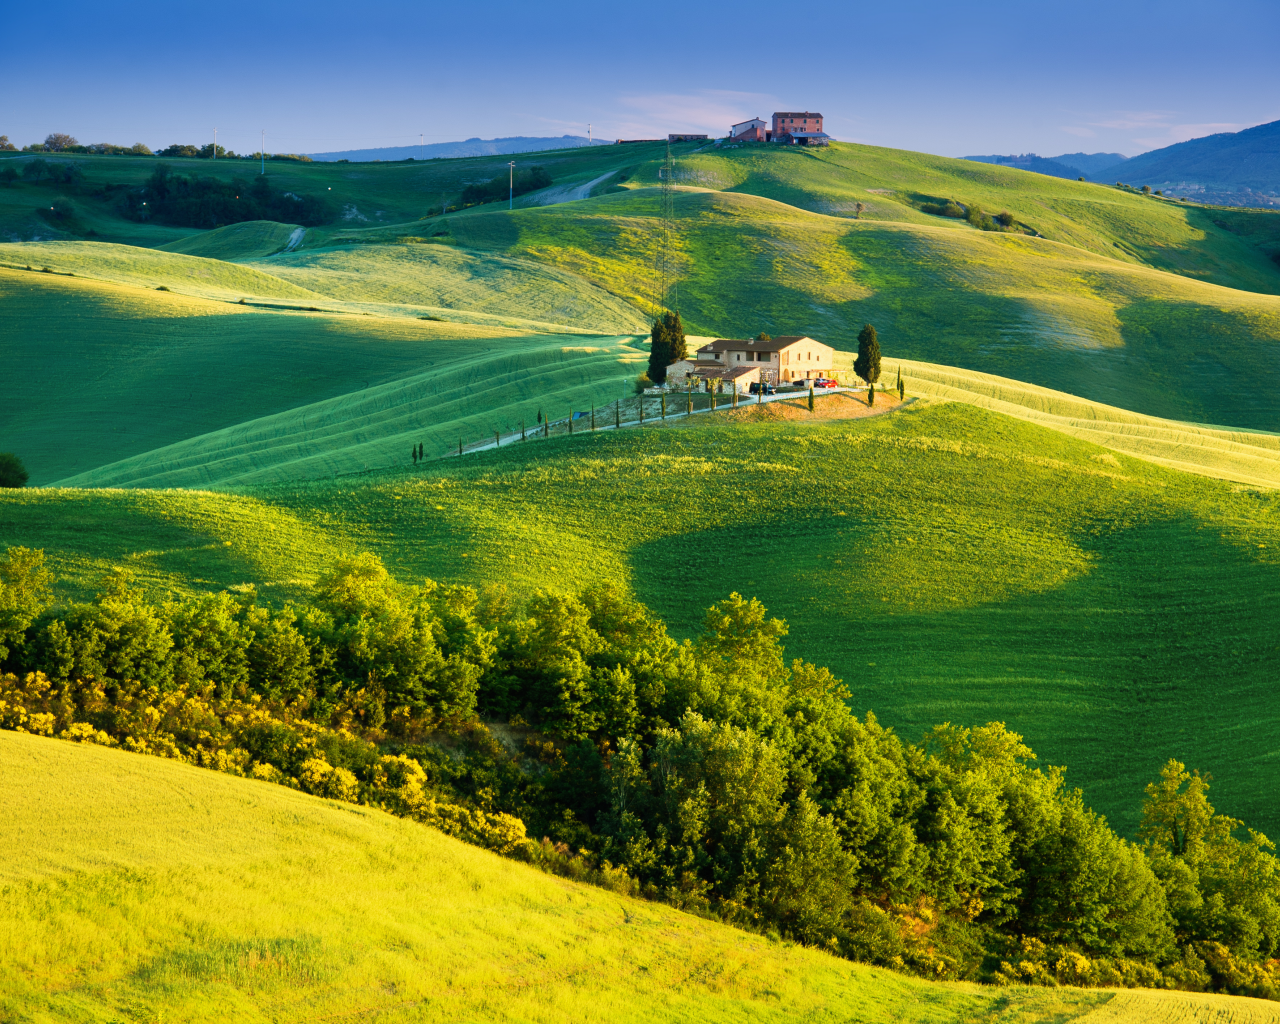 tuscany , landscape, summer, sunlight , italy , sky, trees, house, green field, nature, countryside